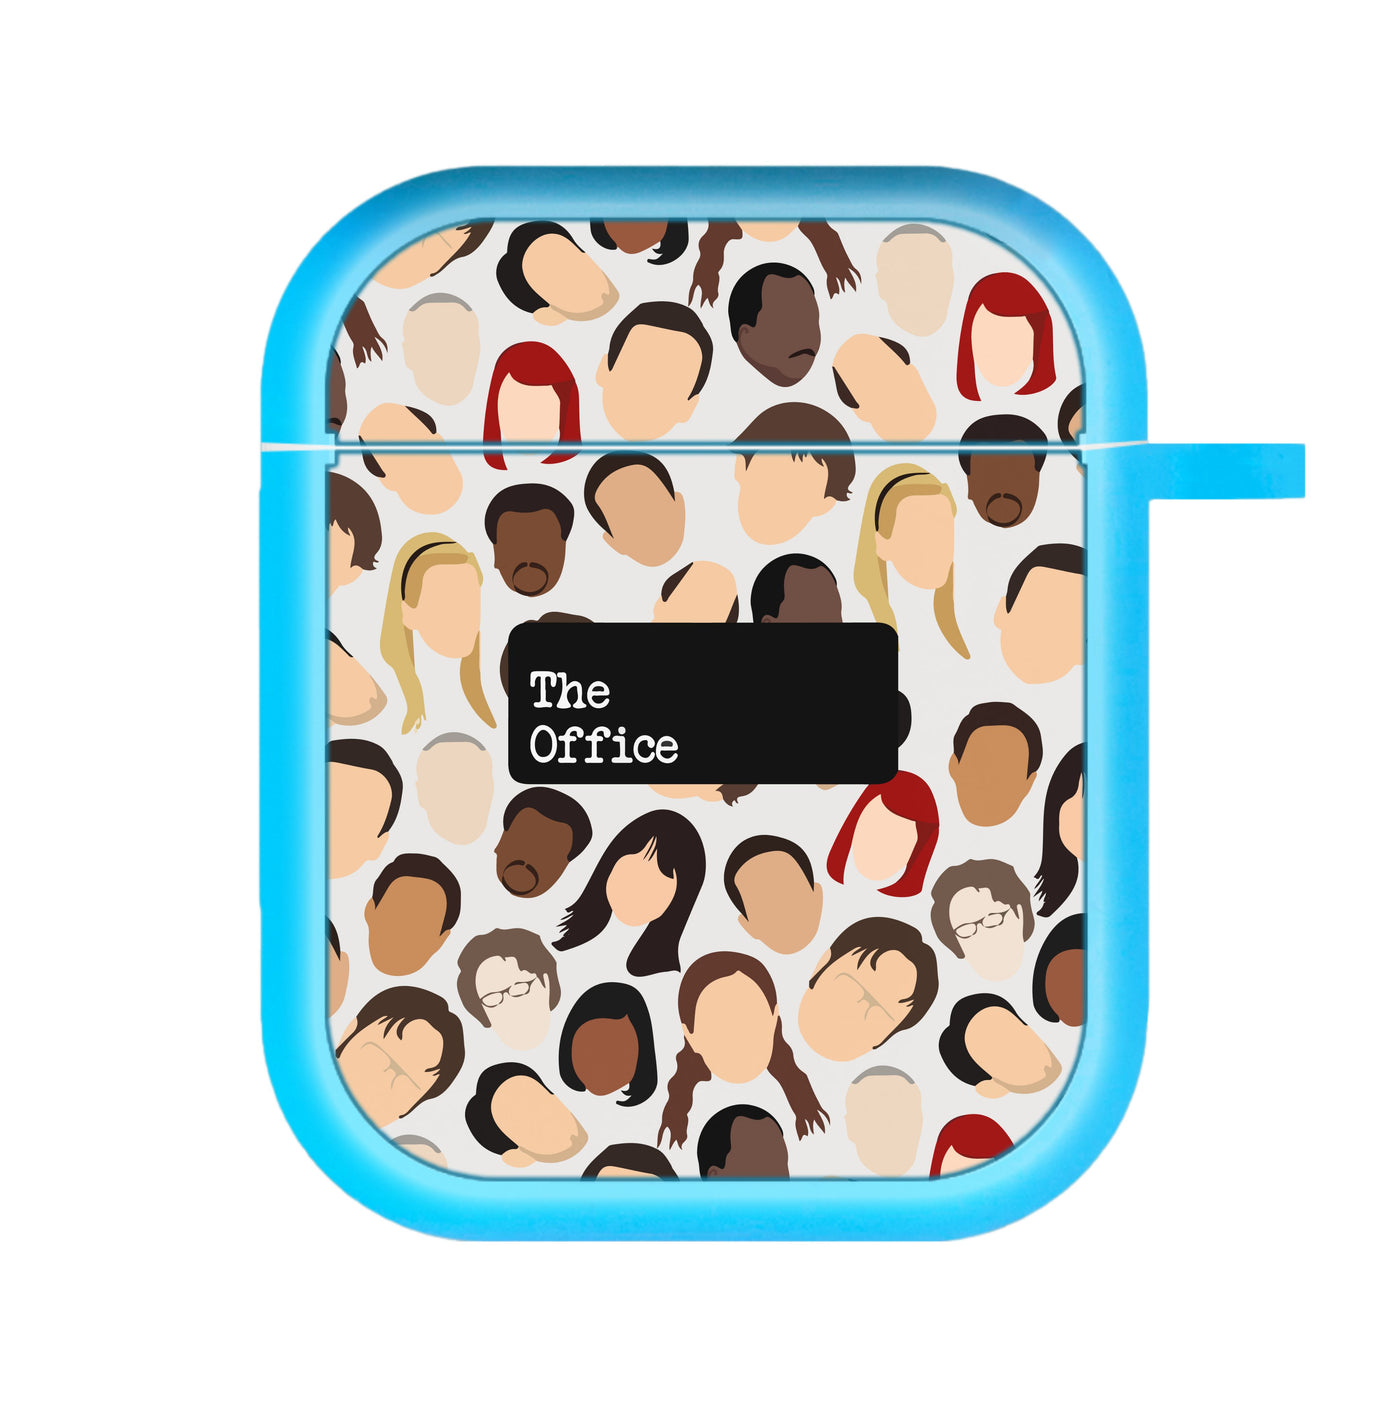 The Office Collage AirPods Case